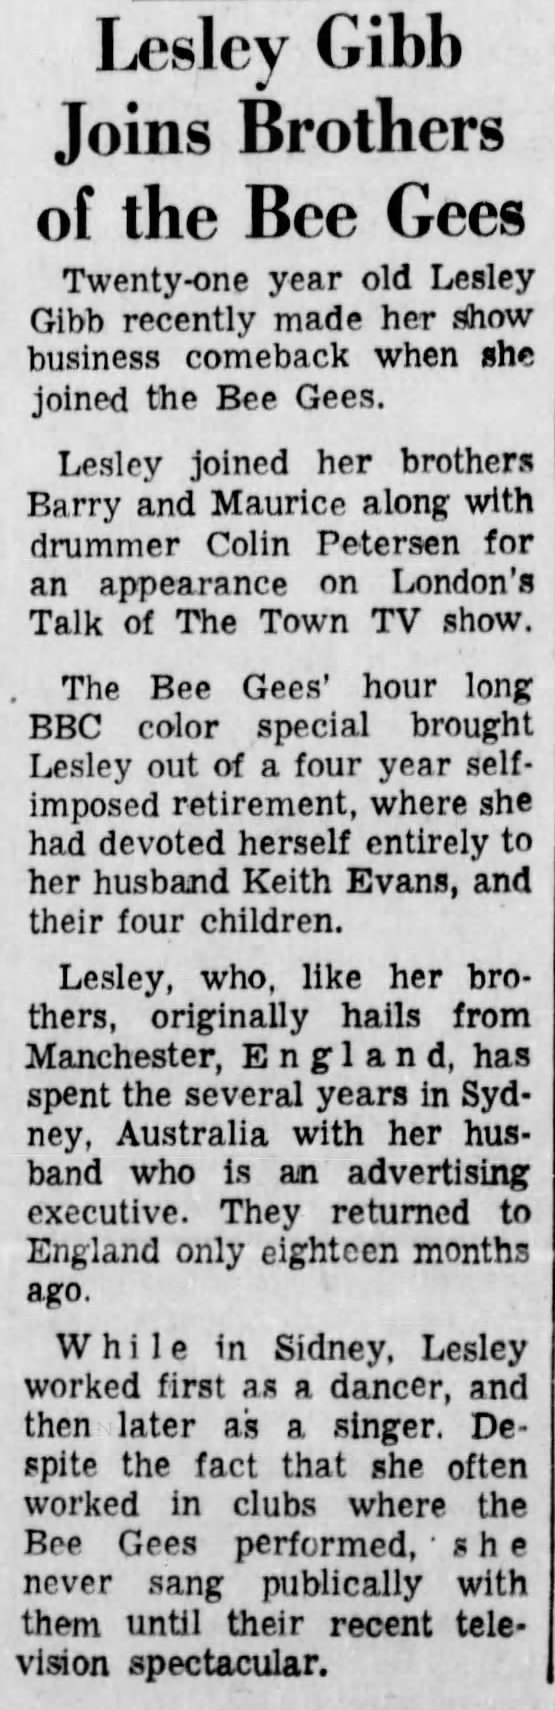 [BU] - Lesley Gibb Joined the Bee Gees